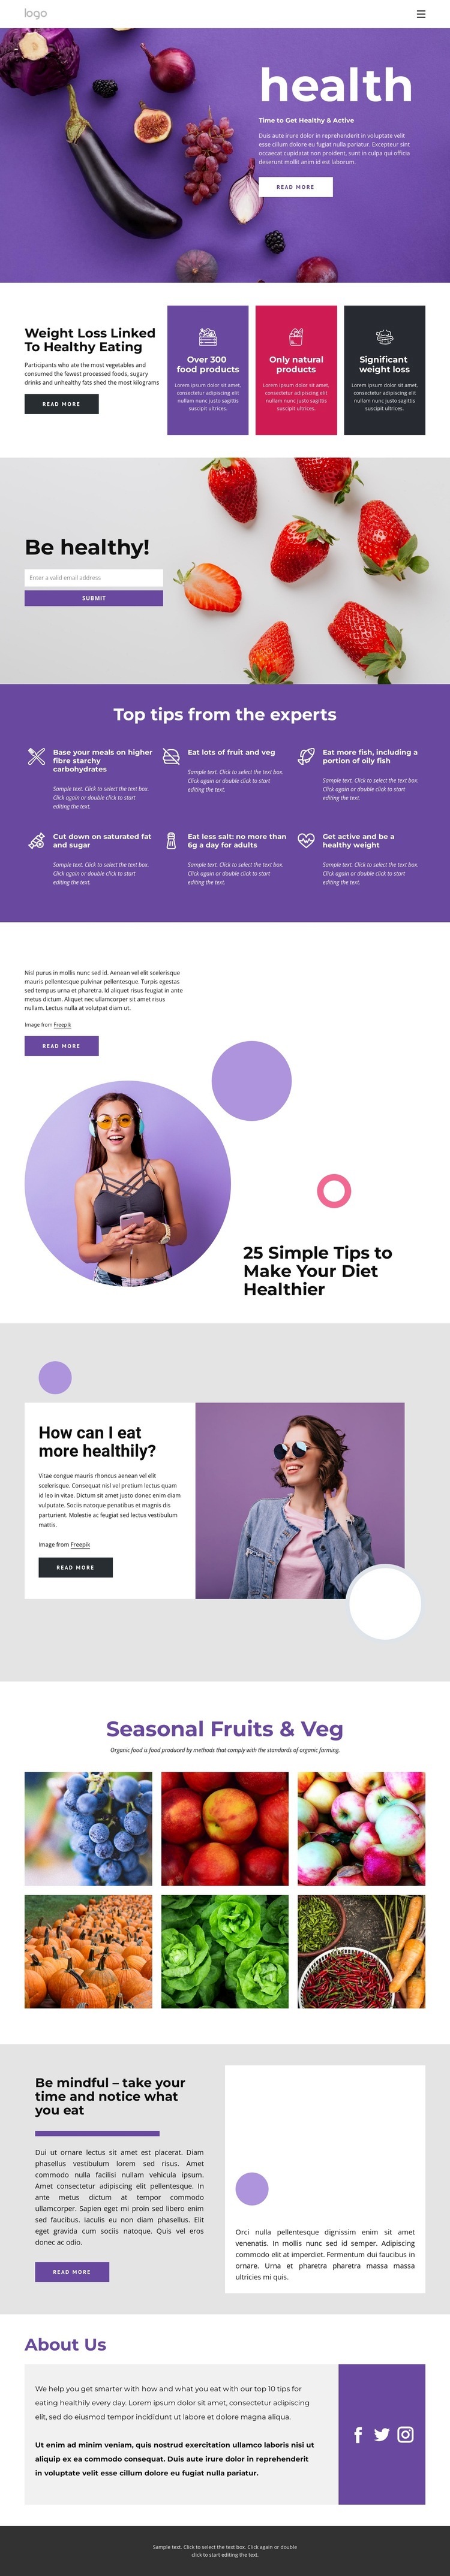 Building a healthy and balanced diet Homepage Design